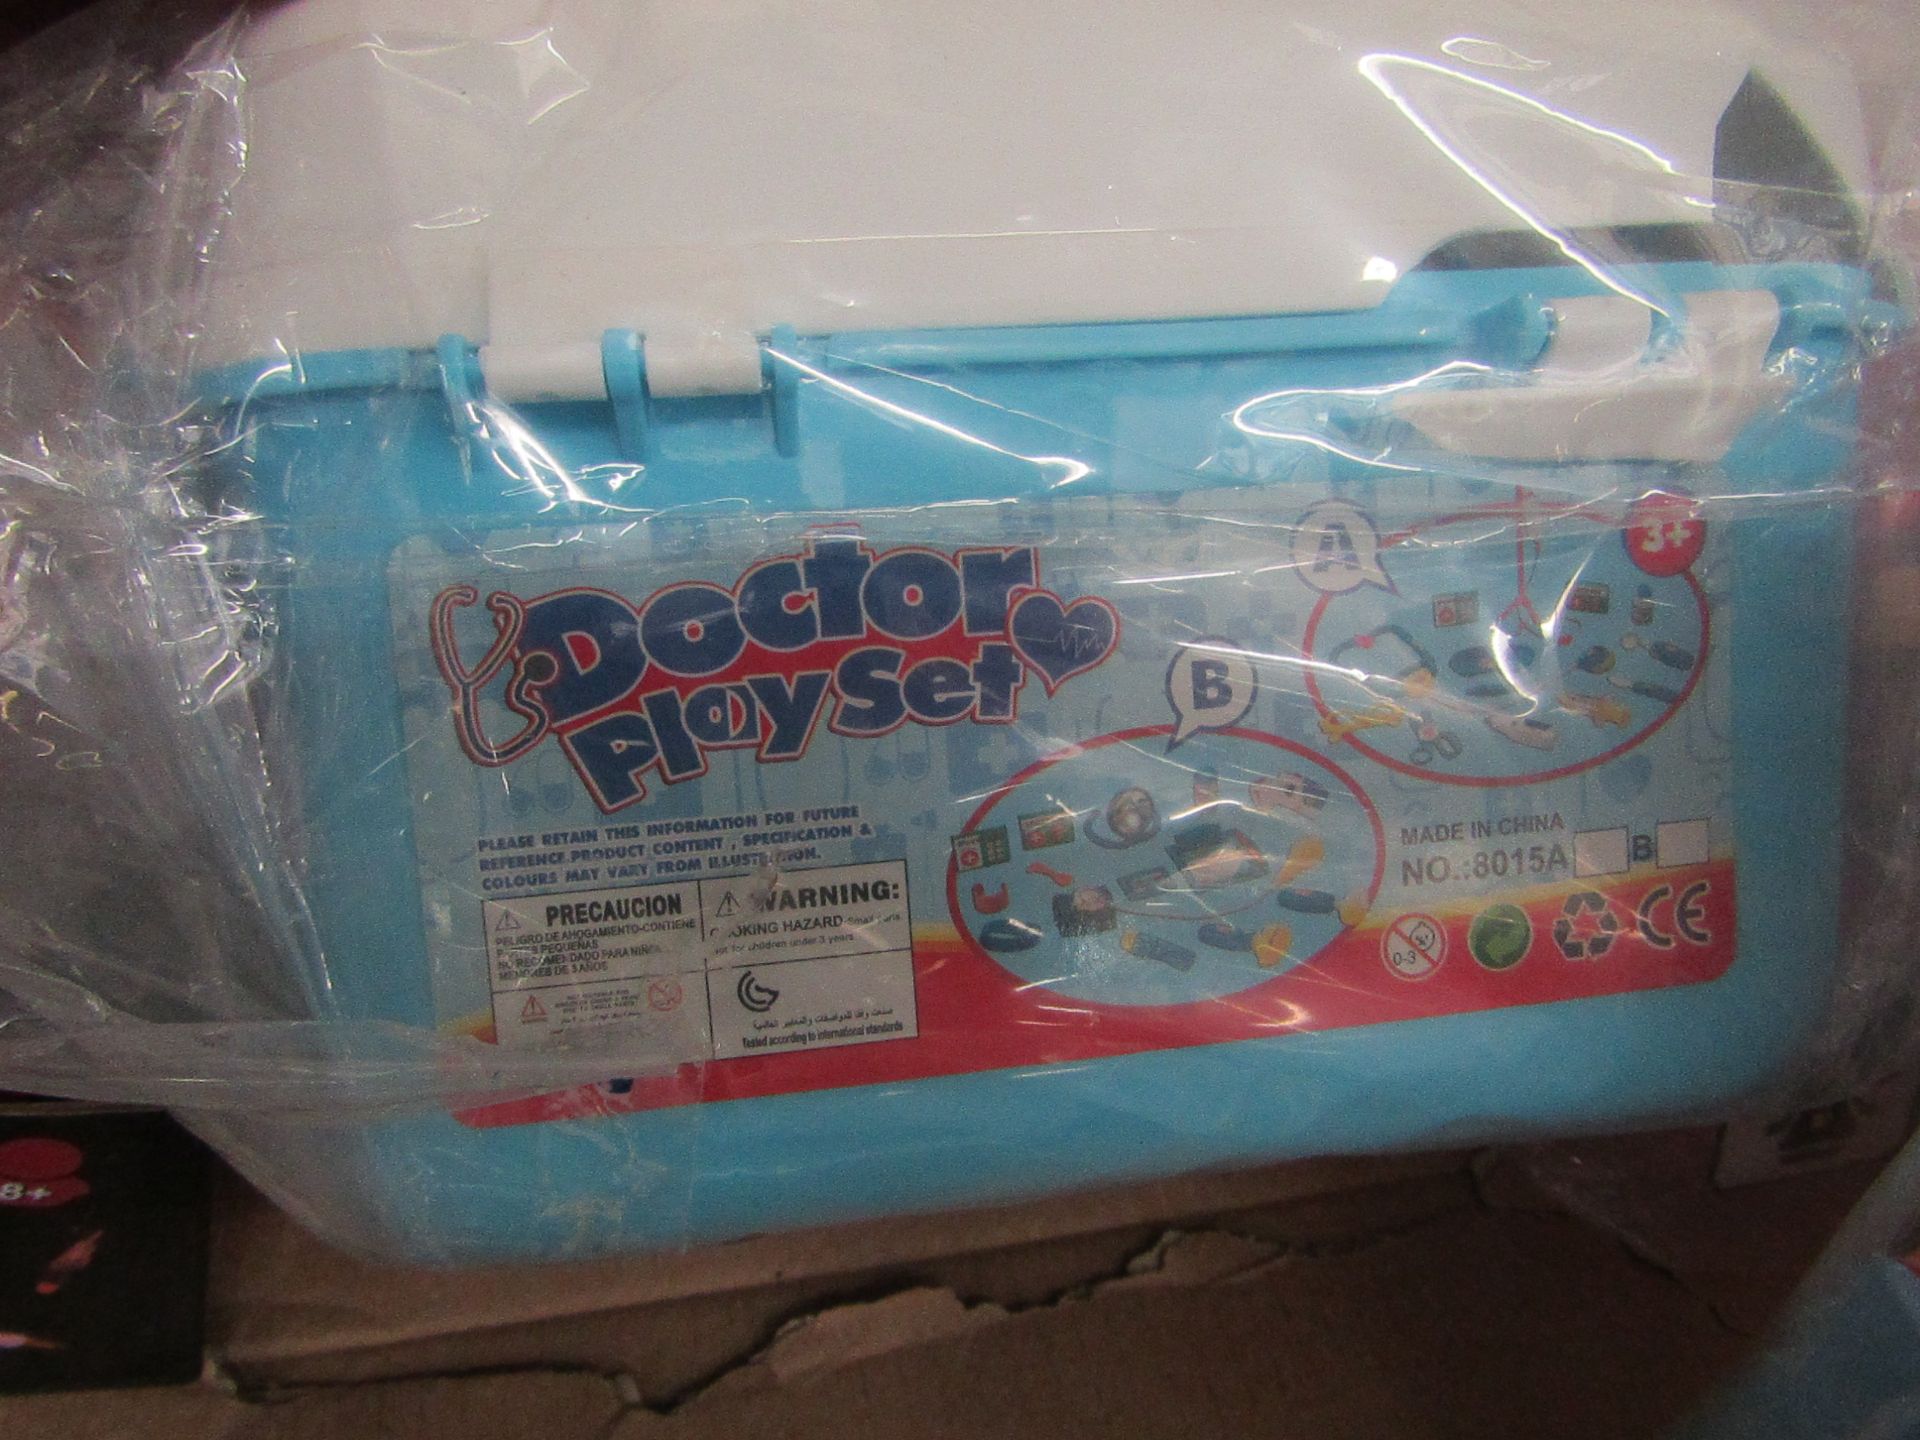 Doctors Kids Playset. Looks new but the carry case is cracked